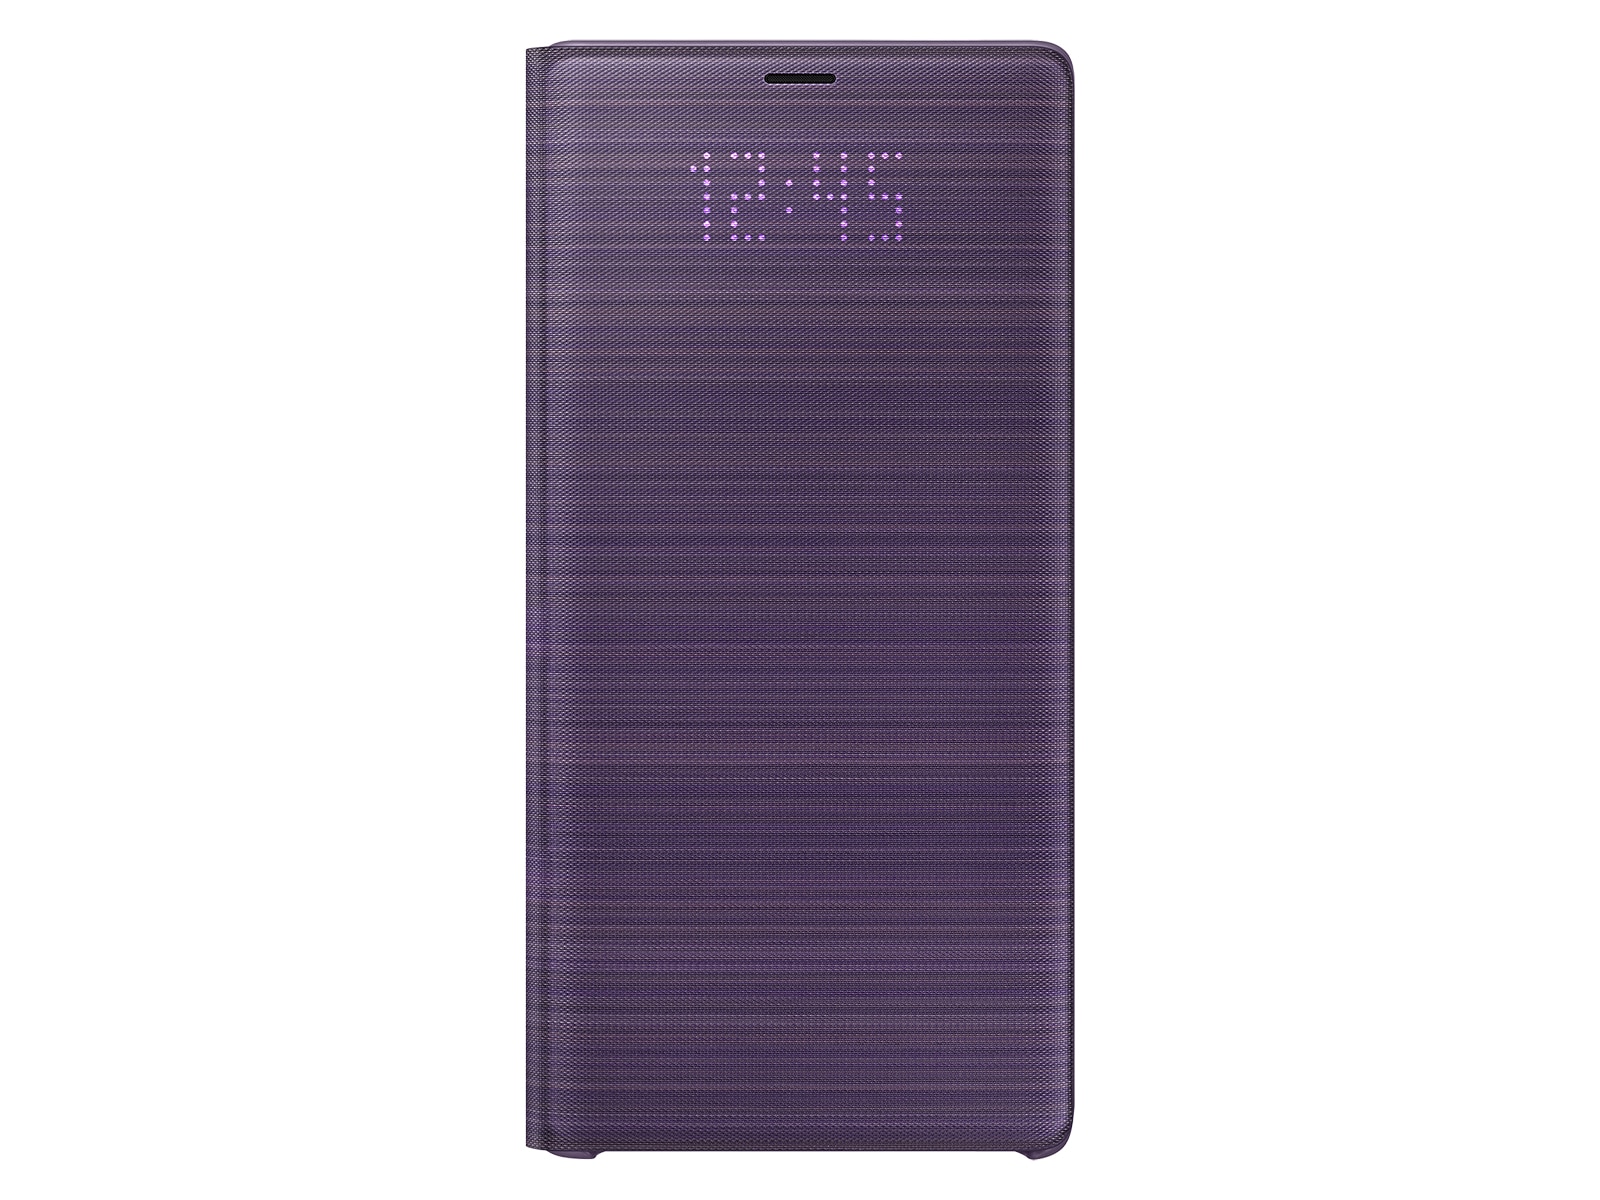 Note9 LED Wallet Cover, Lavender Purple Mobile Accessories - EF-NN960PVEGUS | Samsung